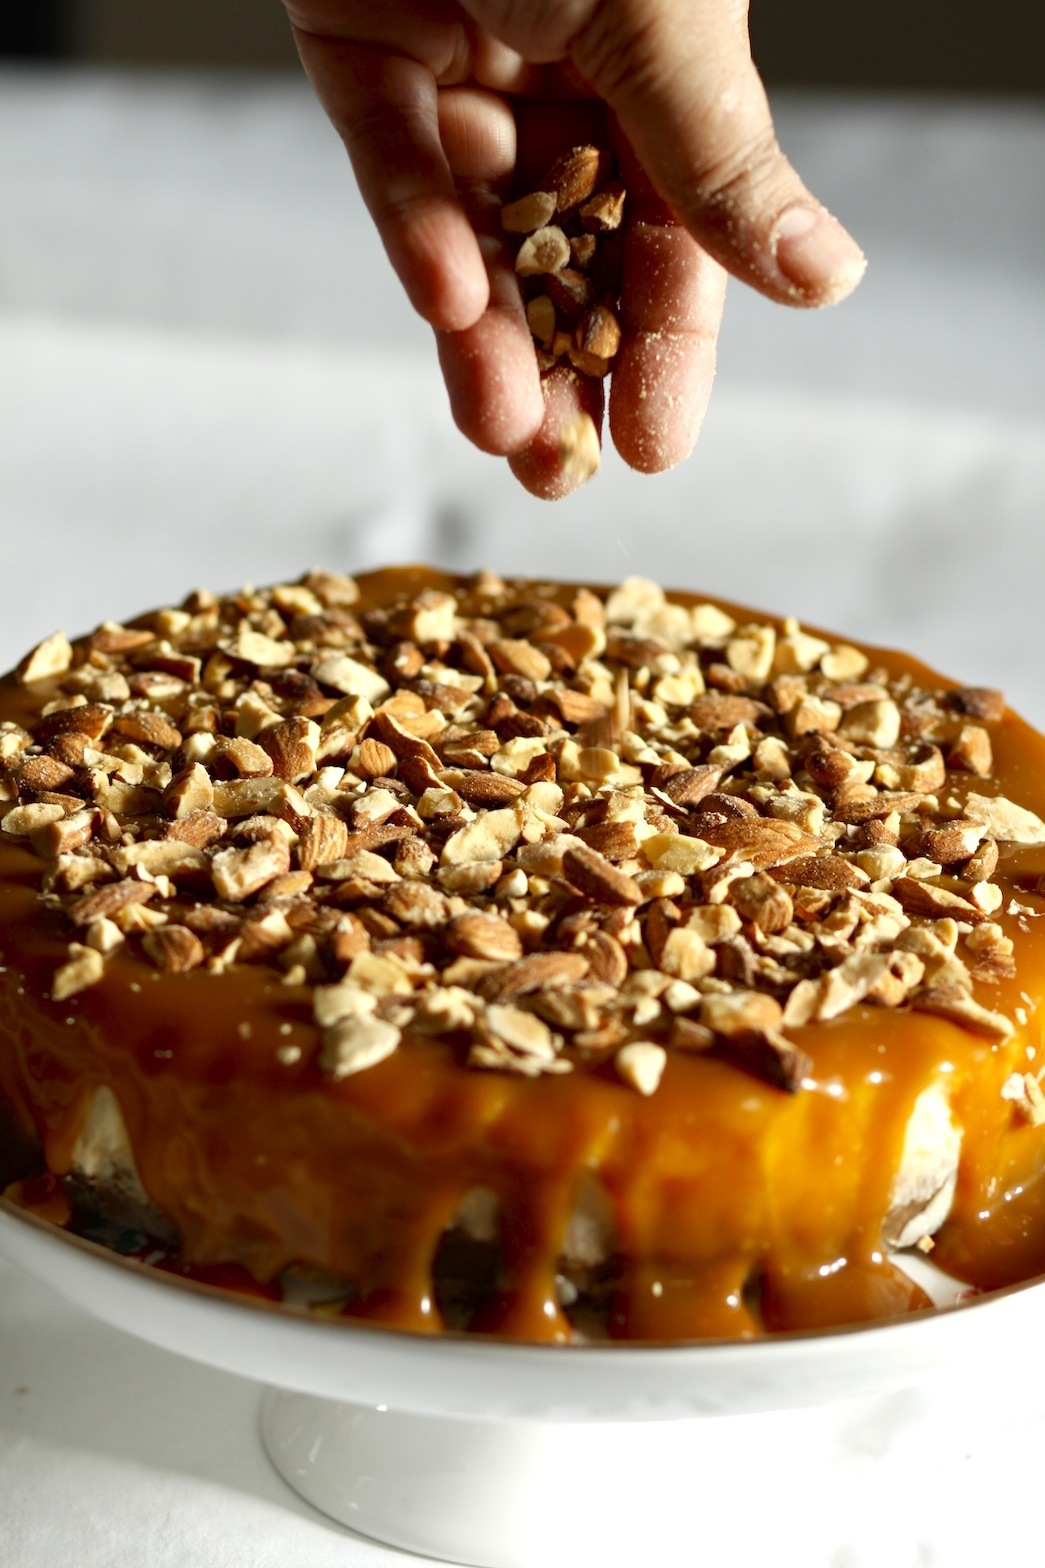 BUTTER ROASTED ALMOND AND SALTED CARAMEL CHEESECAKE